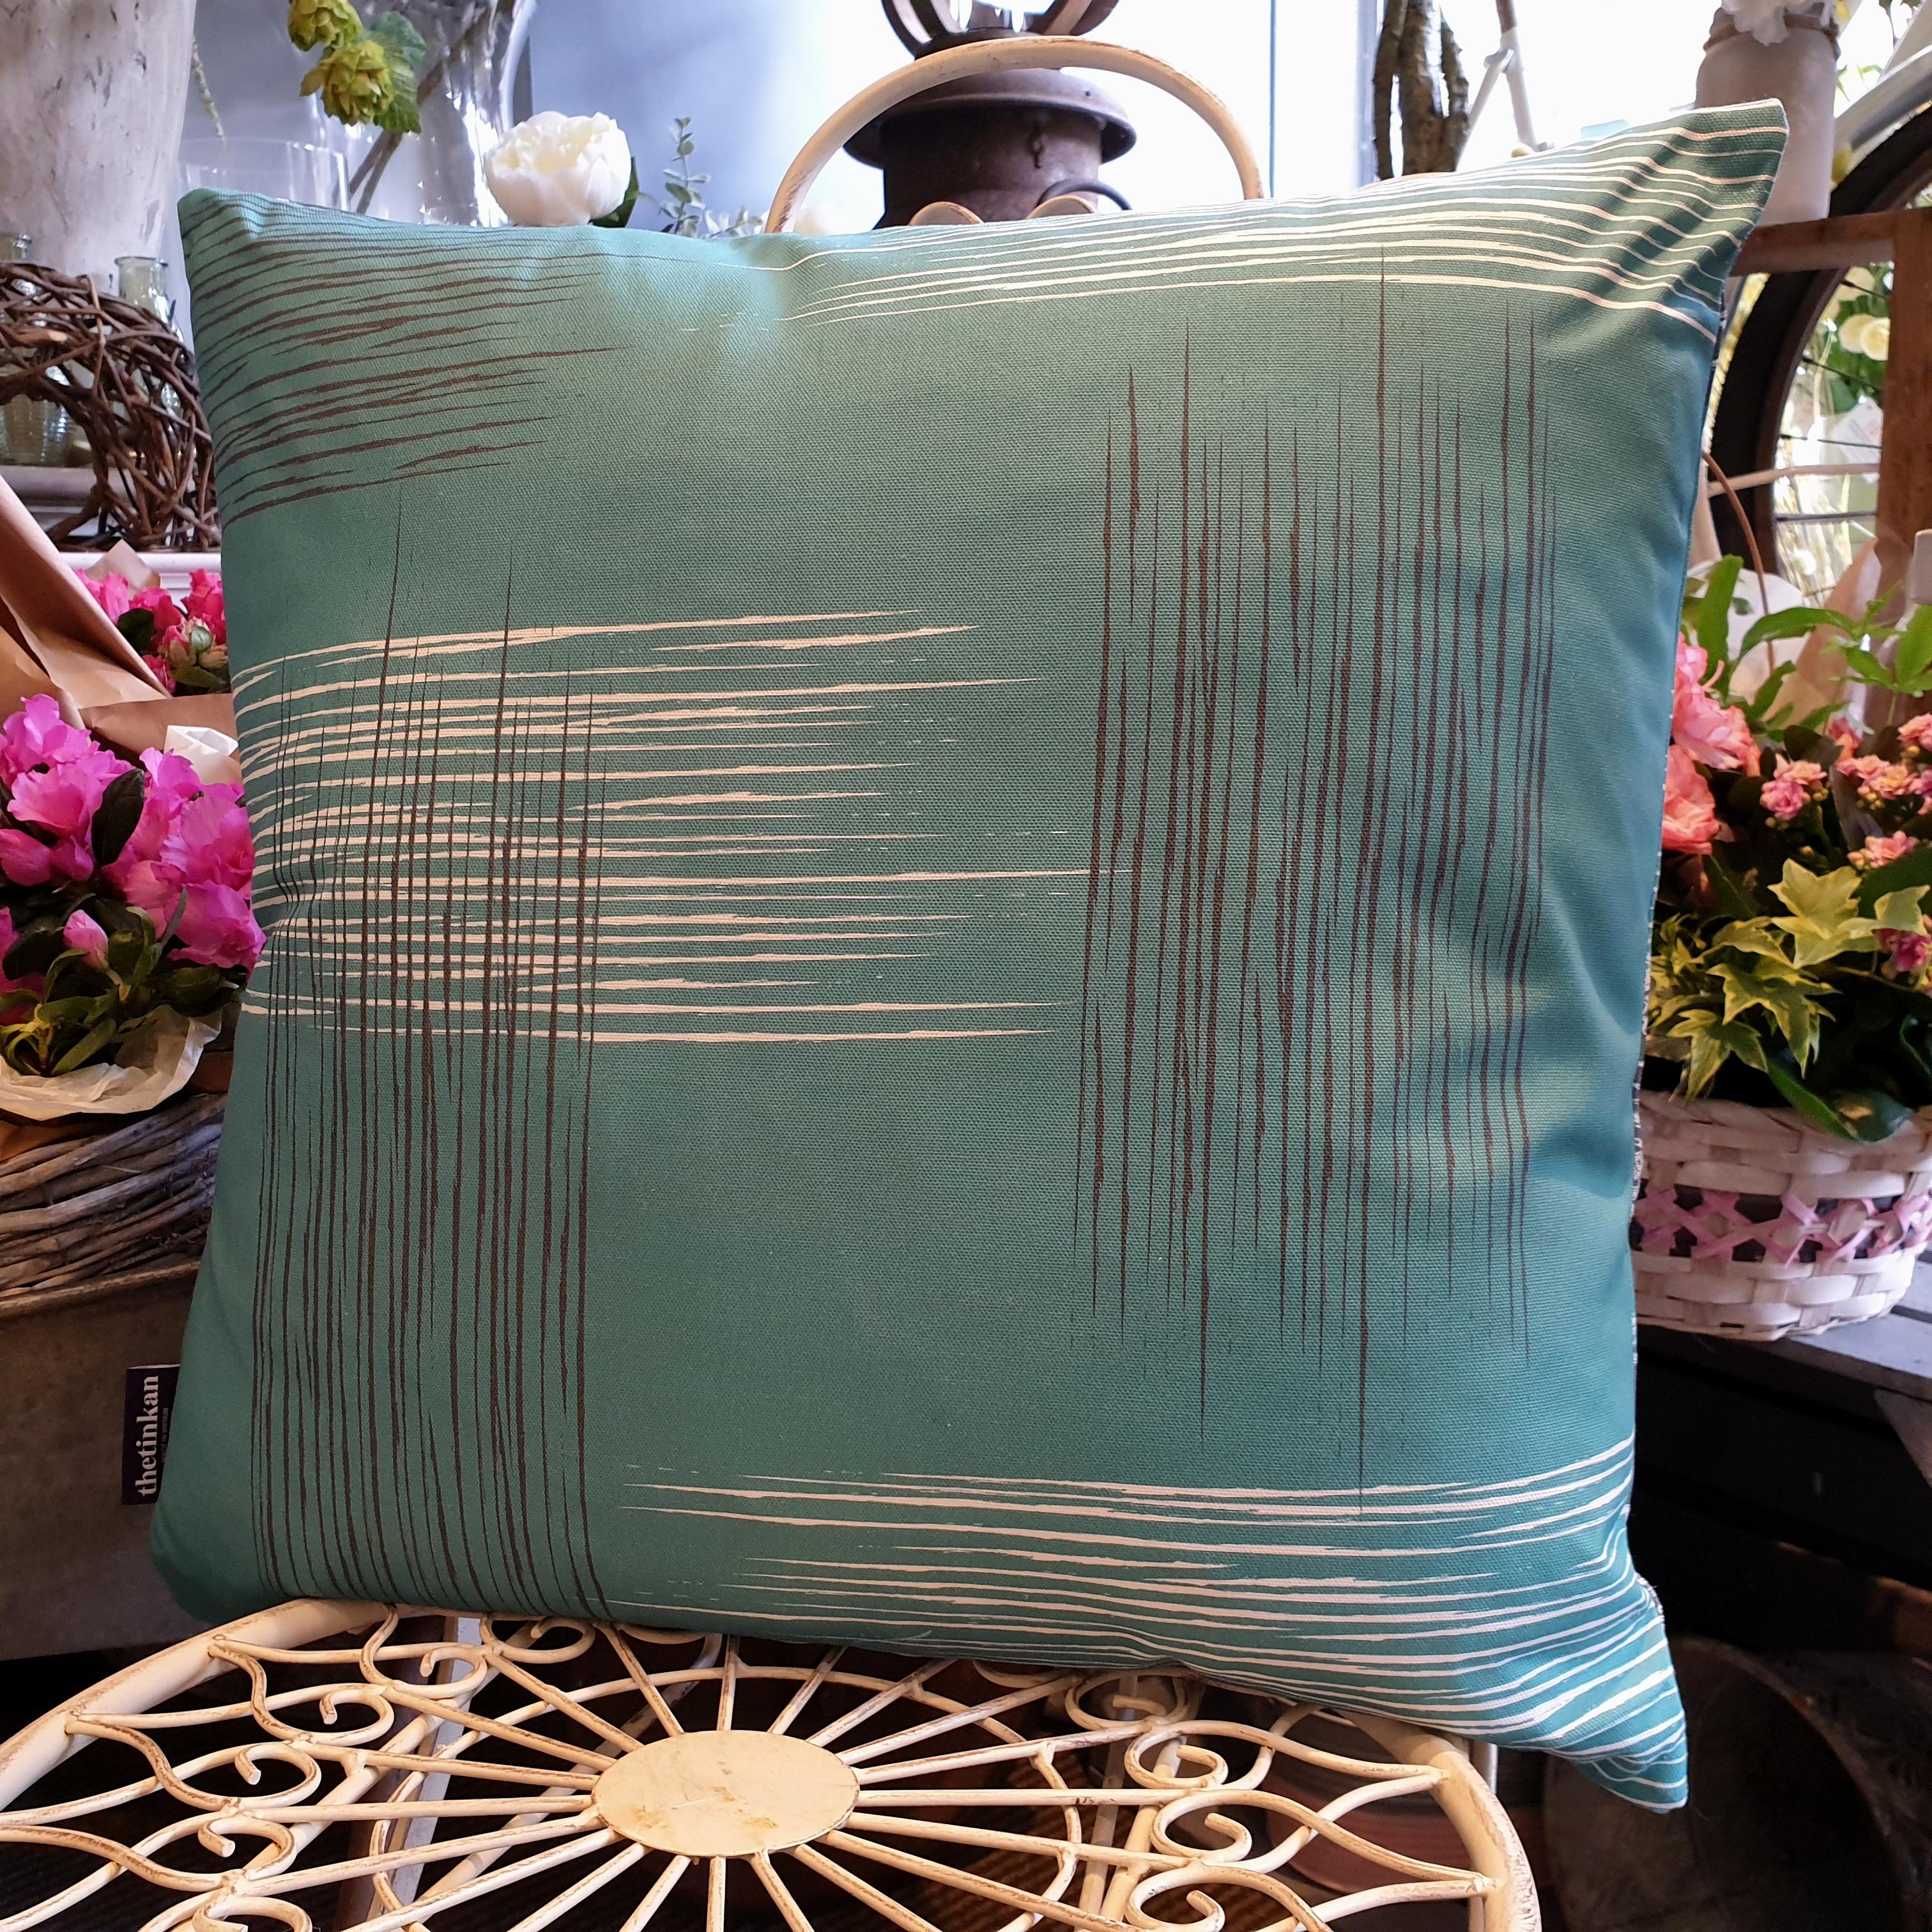 Double-sided aqua teal 51cm square retro themed cushion with artistic grey and white shards designed by thetinkan. Available with an optional luxury cushion inner pad. VIEW PRODUCT >>